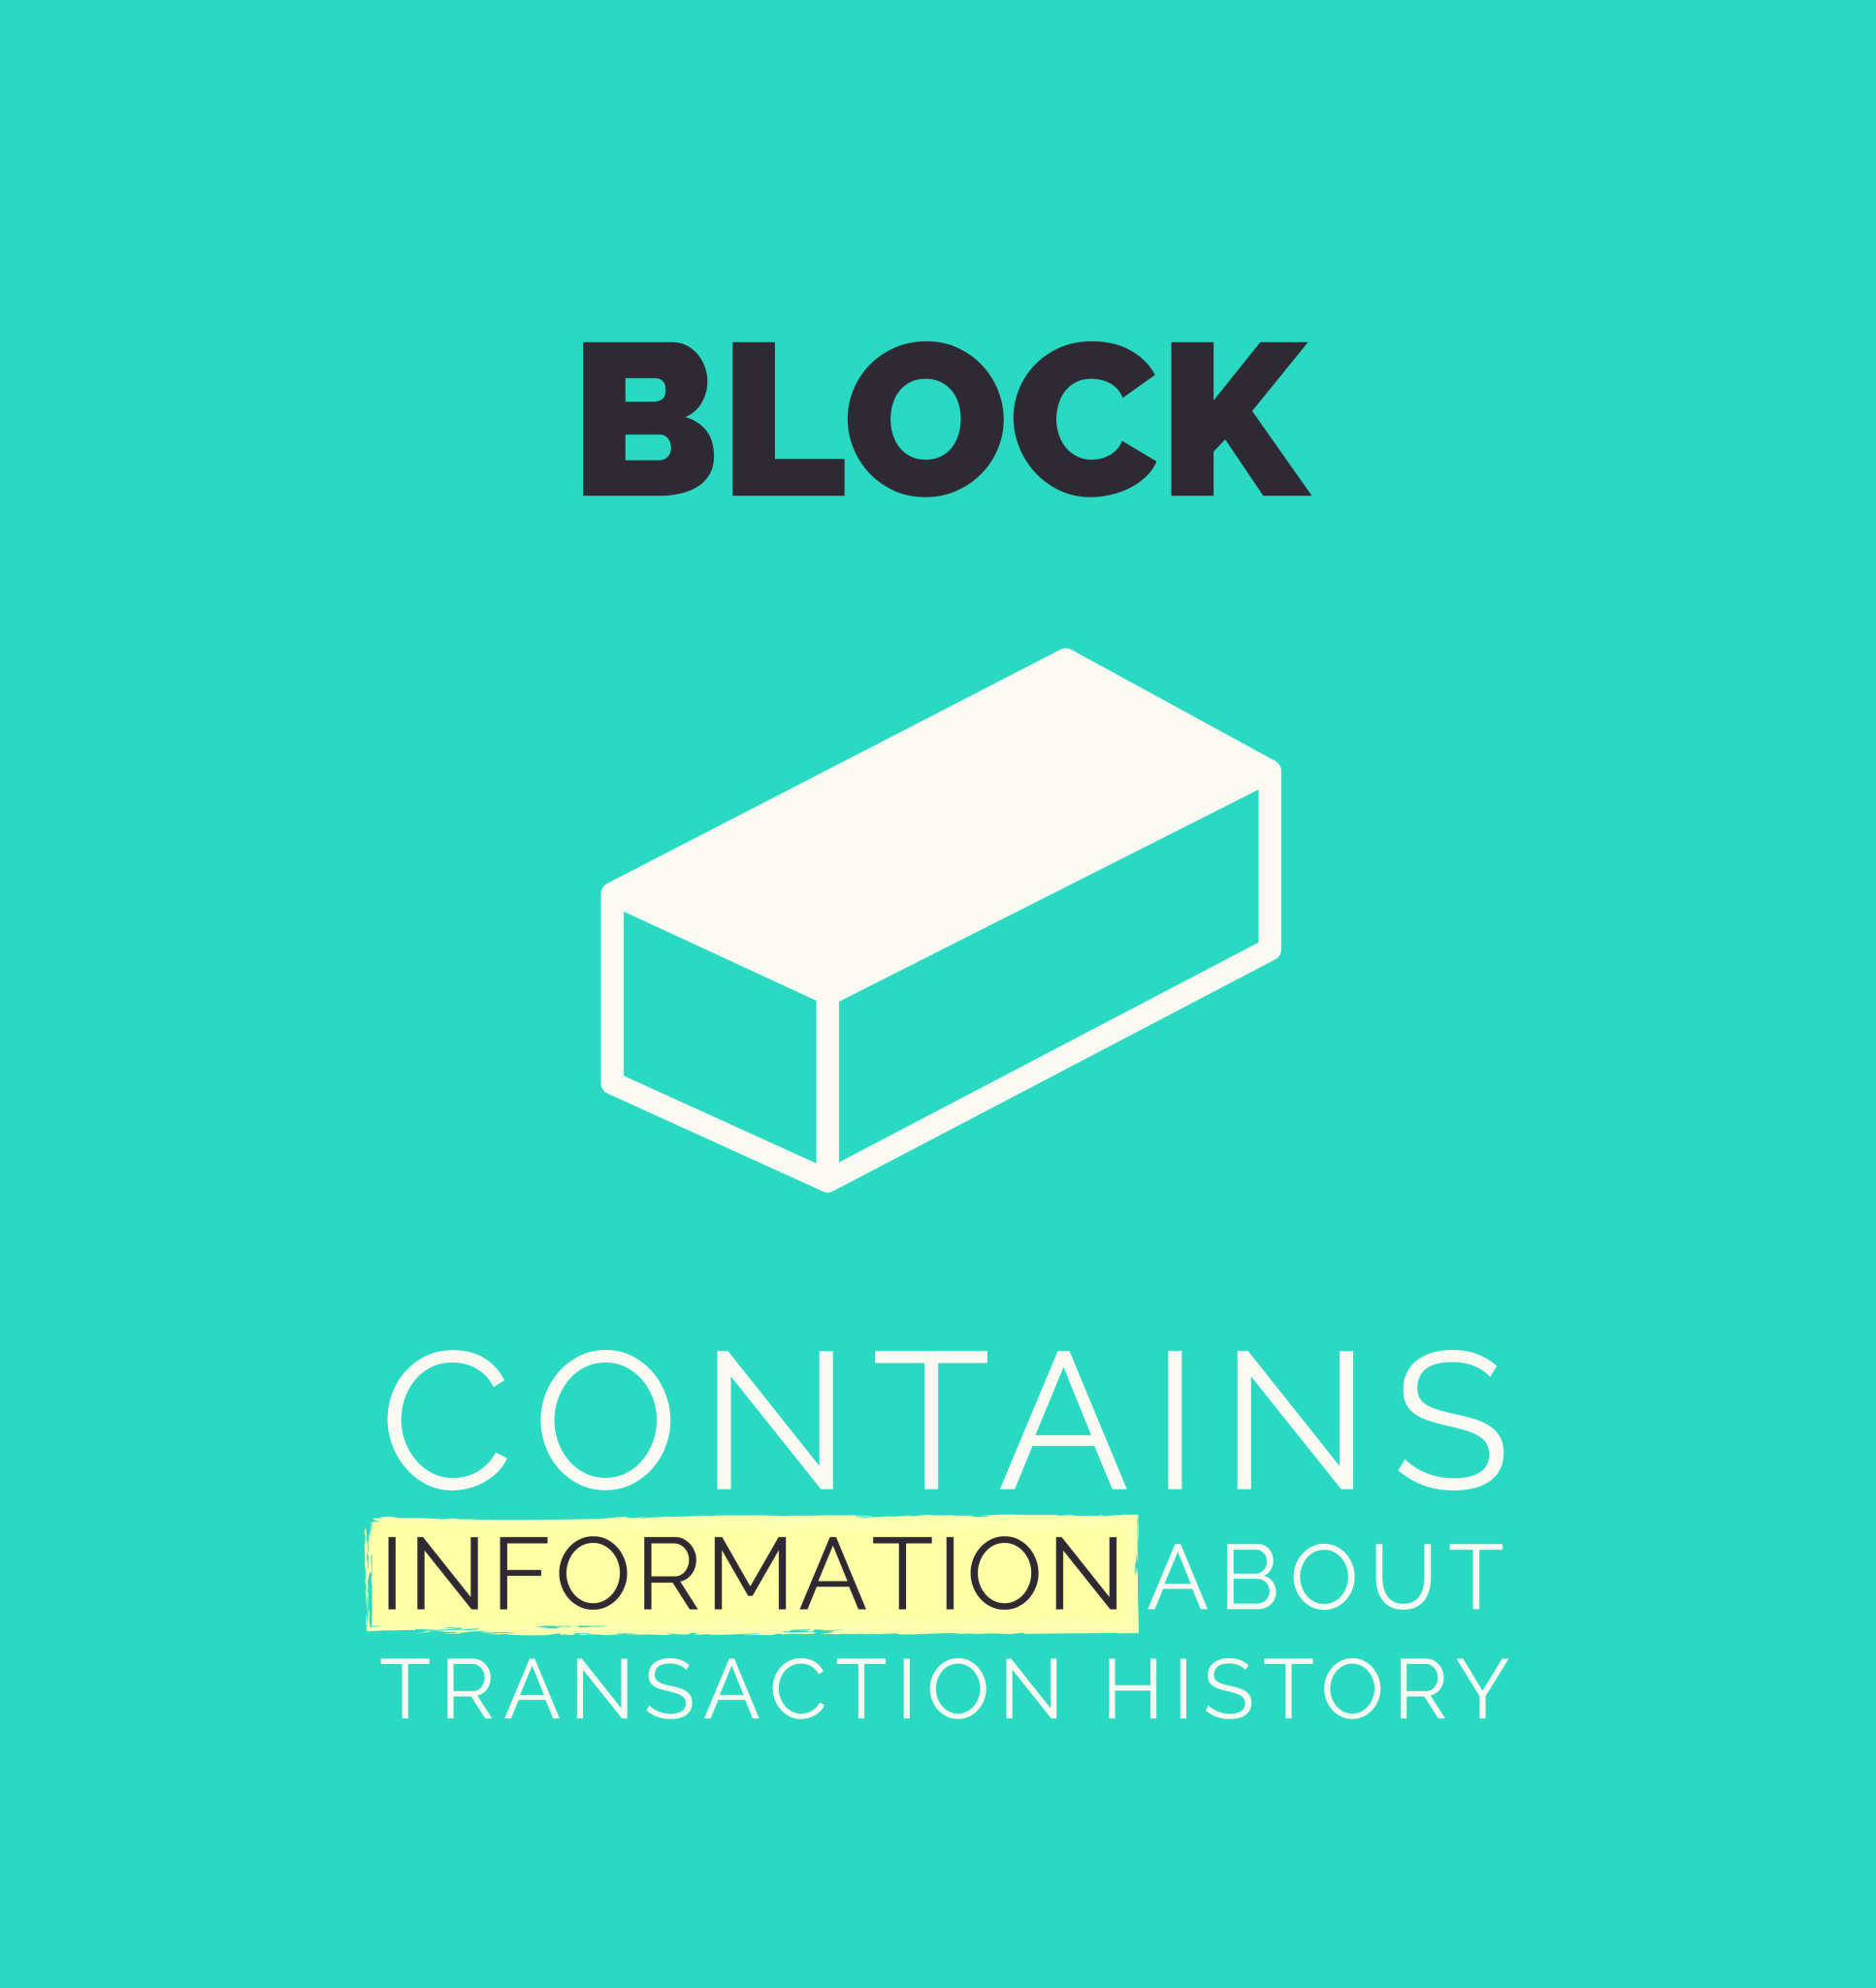 Illustration caption: Block contains information about transaction history